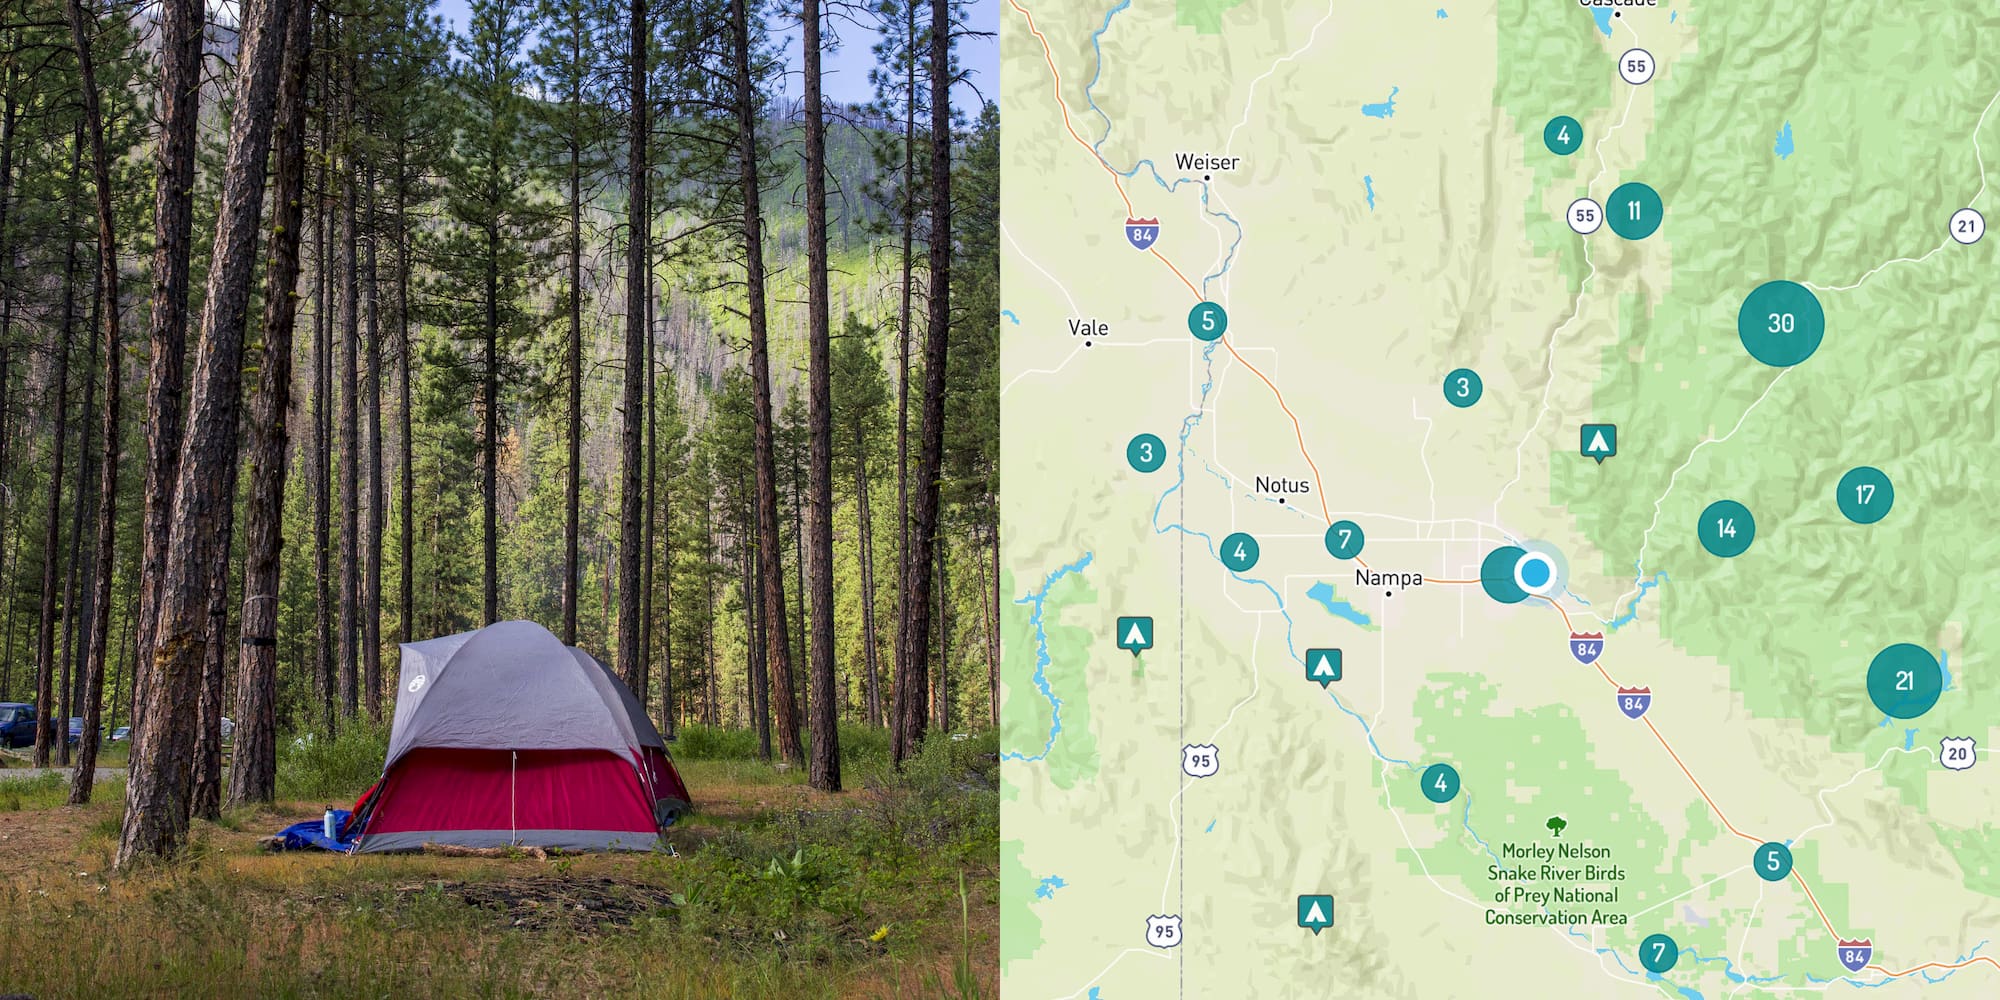 Image of campground in Boise, Idaho and map of campgrounds nearby.